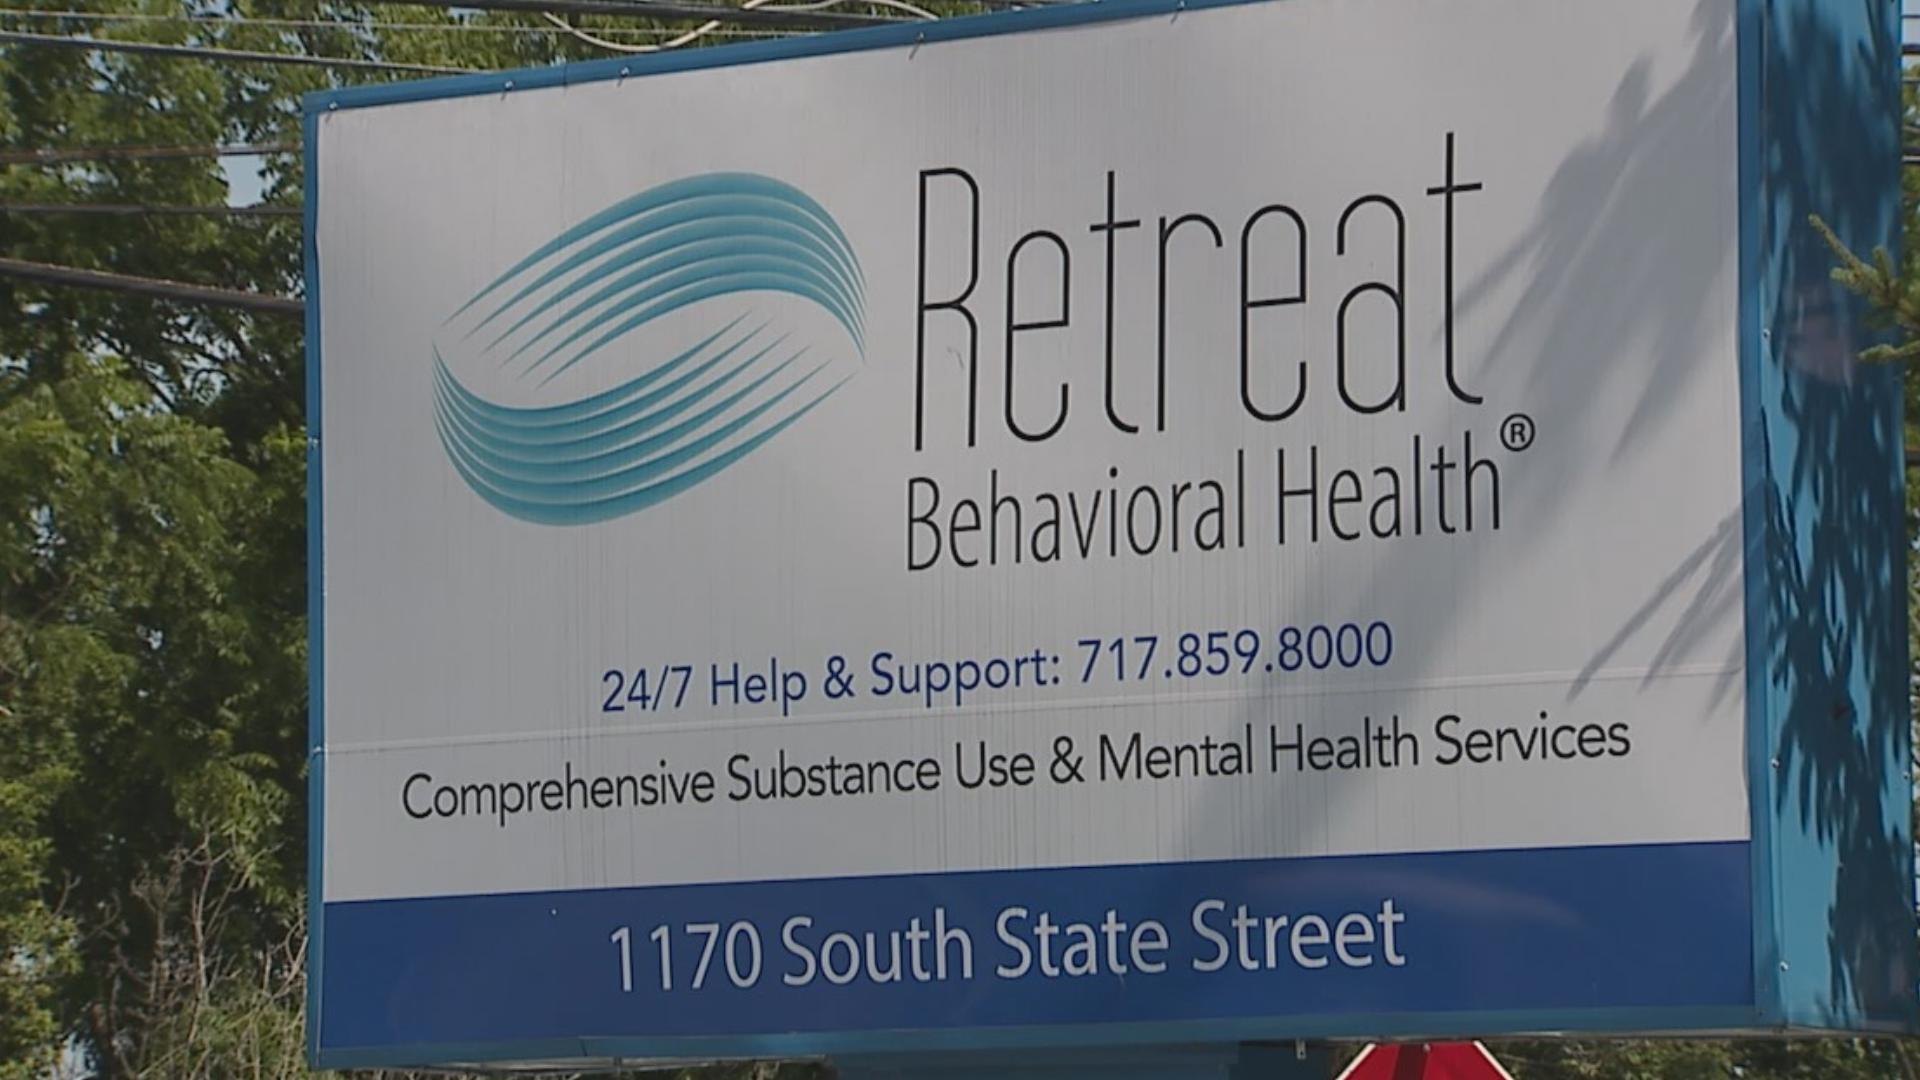 Retreat Behavioral Health operates locations in Ephrata and Akron, along with facilities in Connecticut and Florida.